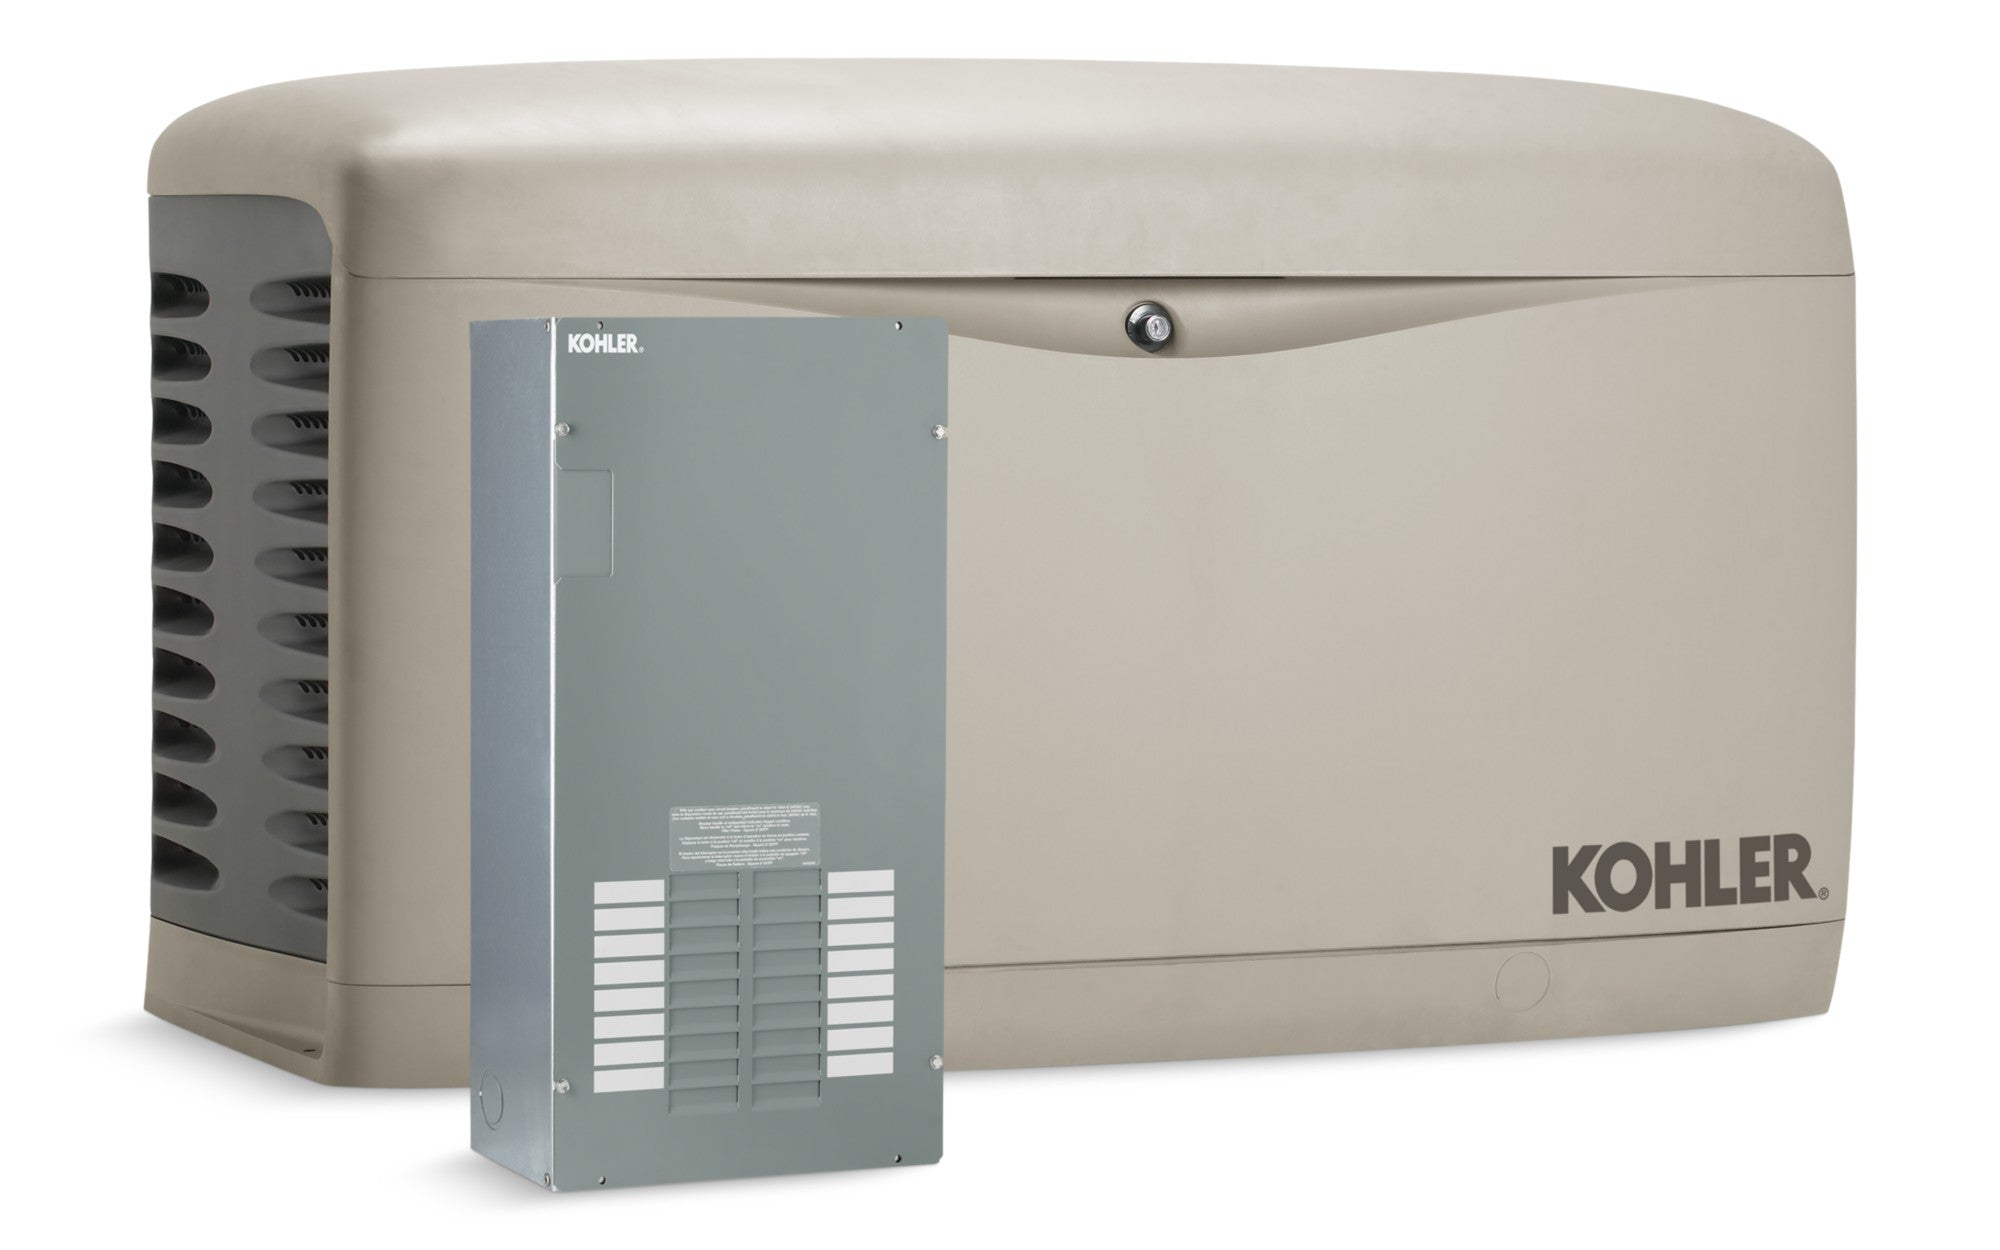 Kohler 14RESAL-200SELS Air-Cooled Standby Generator with 200 Amp Transfer Switch Single Phase, 14,000-Watt